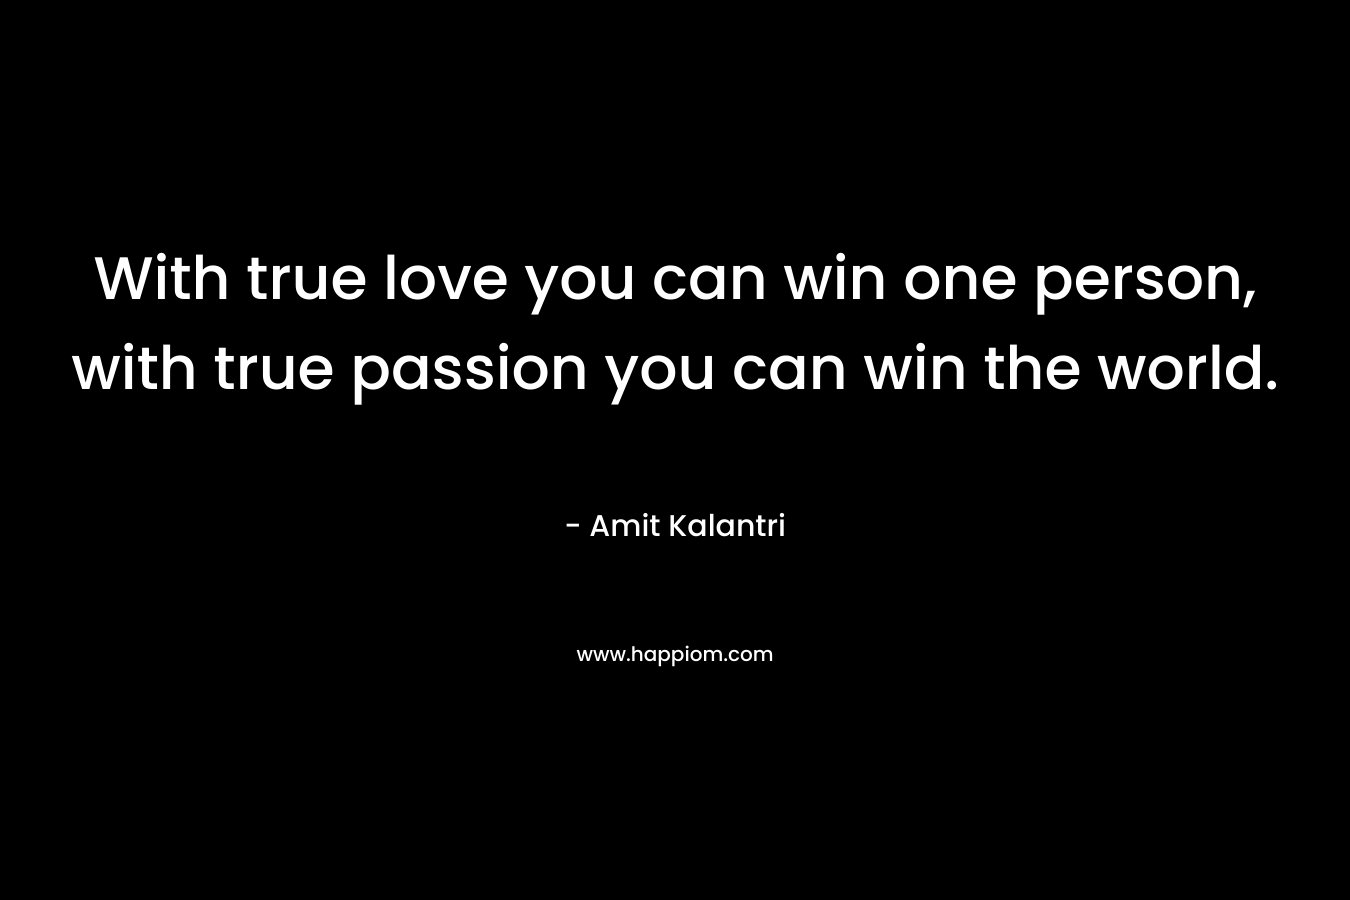 With true love you can win one person, with true passion you can win the world.